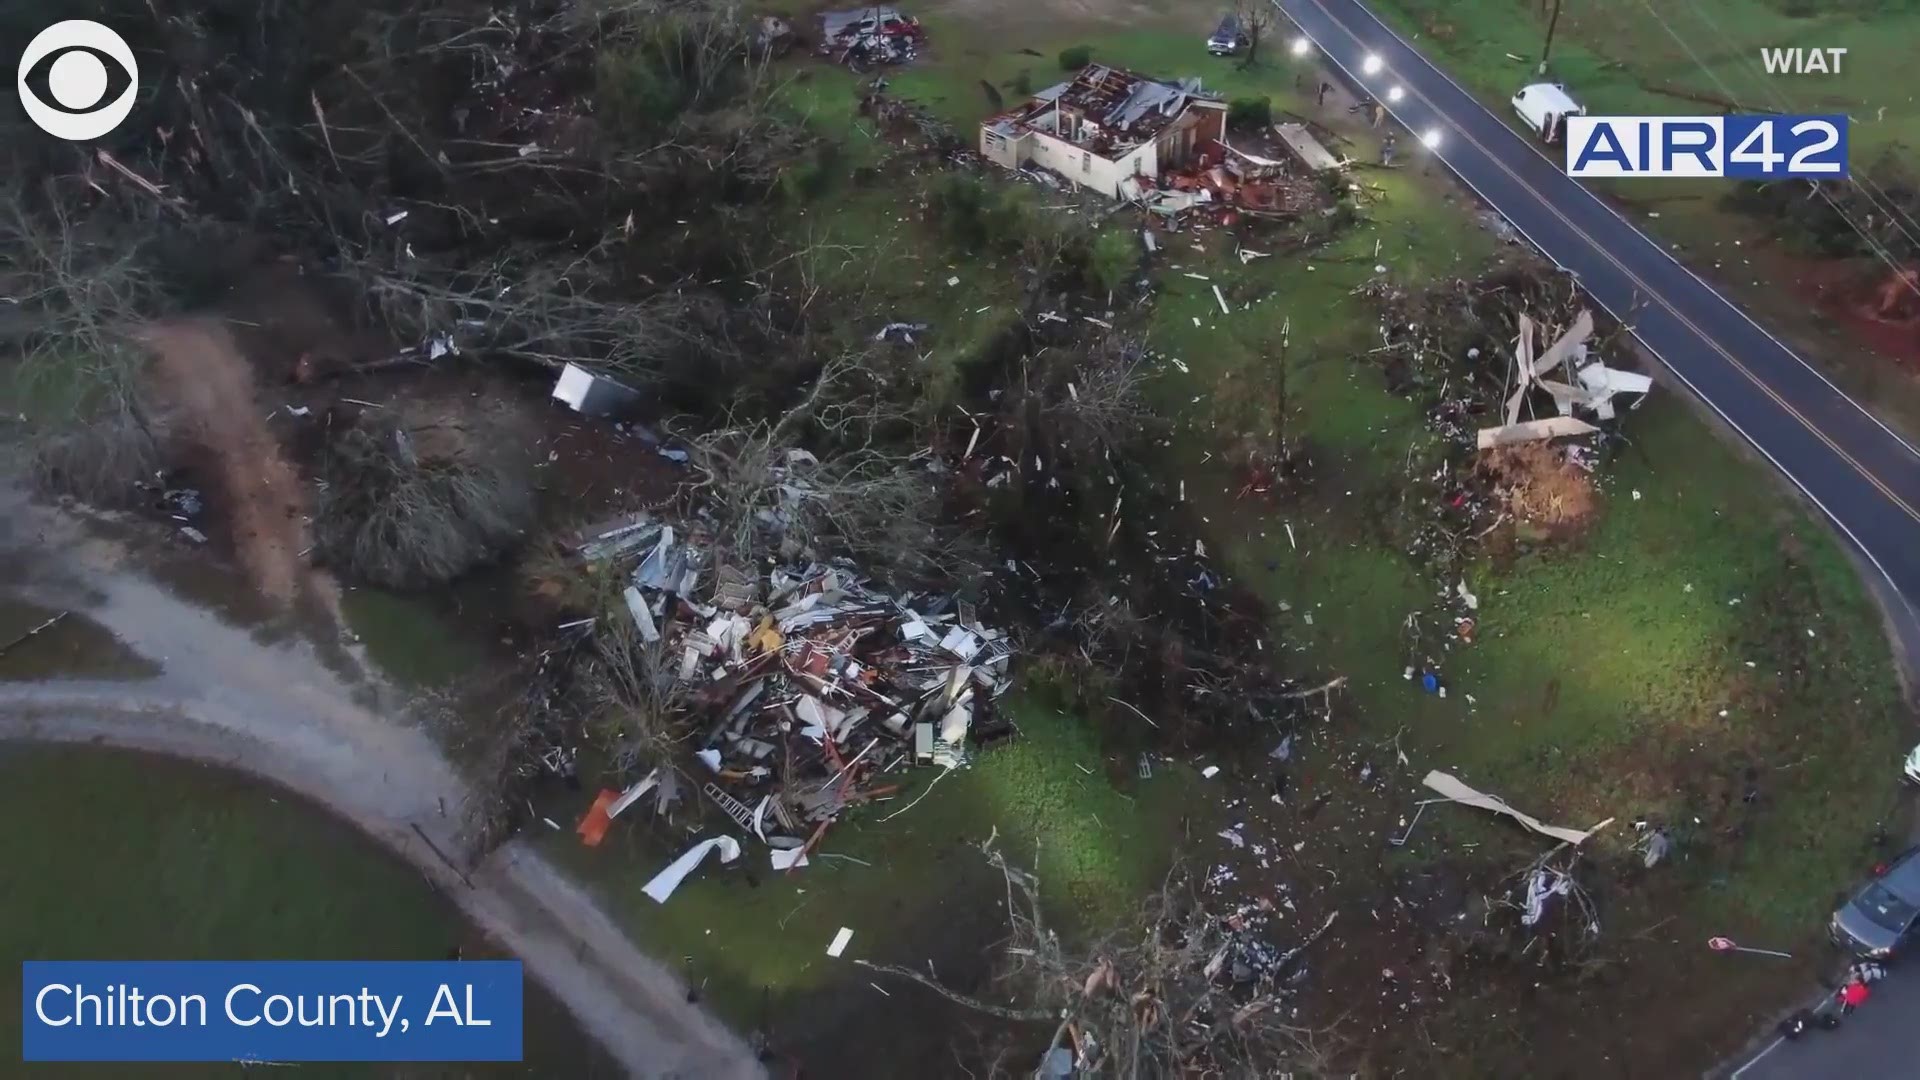 Drone footage shows some of the damage in Chilton County, AL after severe storms ripped through the area Wednesday (3/17).